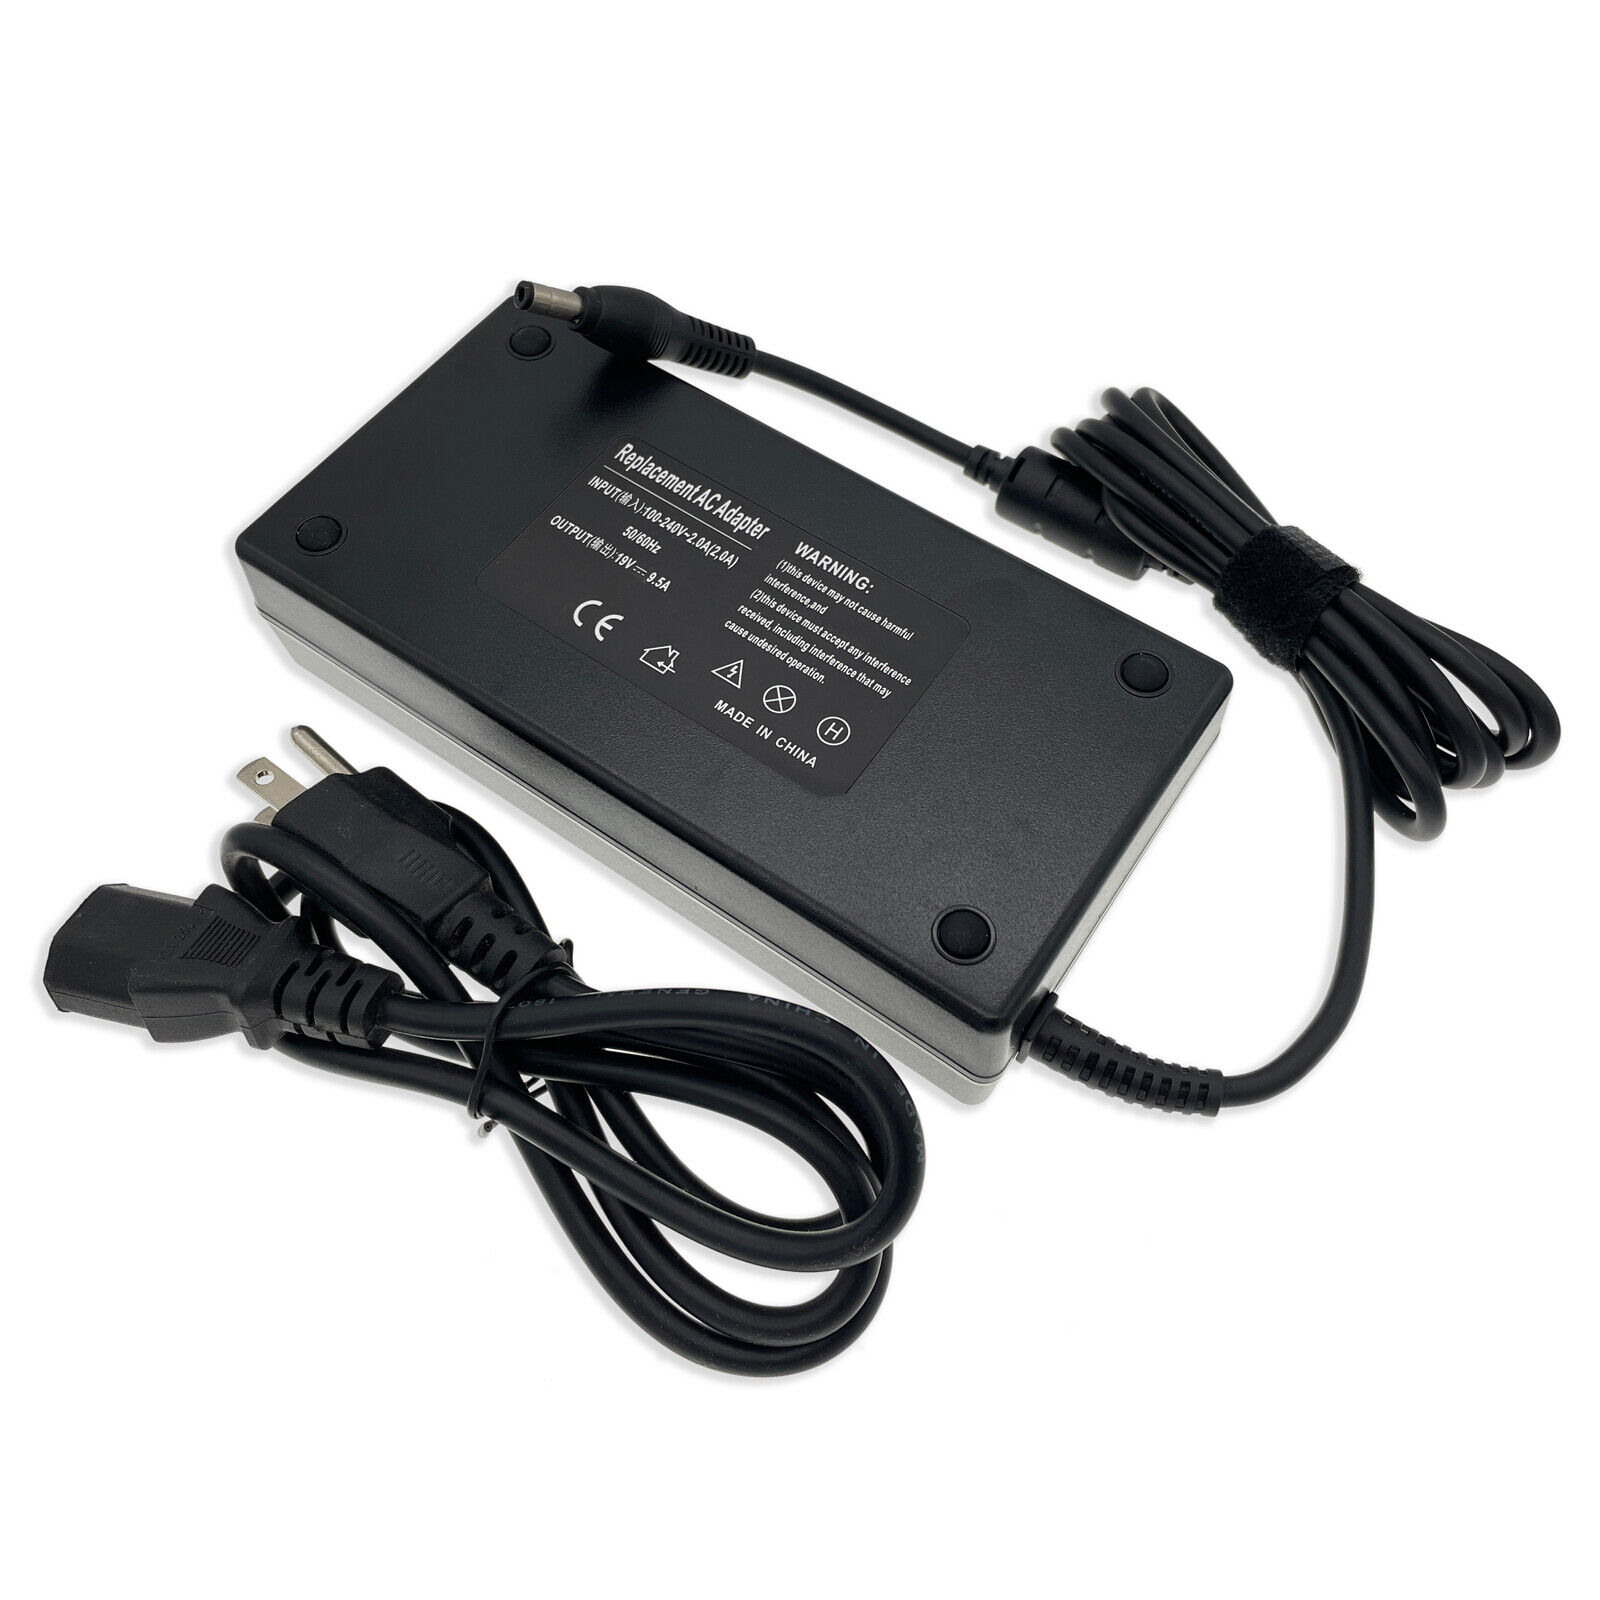 New 180W 19V 9.5A AC Adapter Power Charger Cord For MSI GT70 0NC-004US Notebook